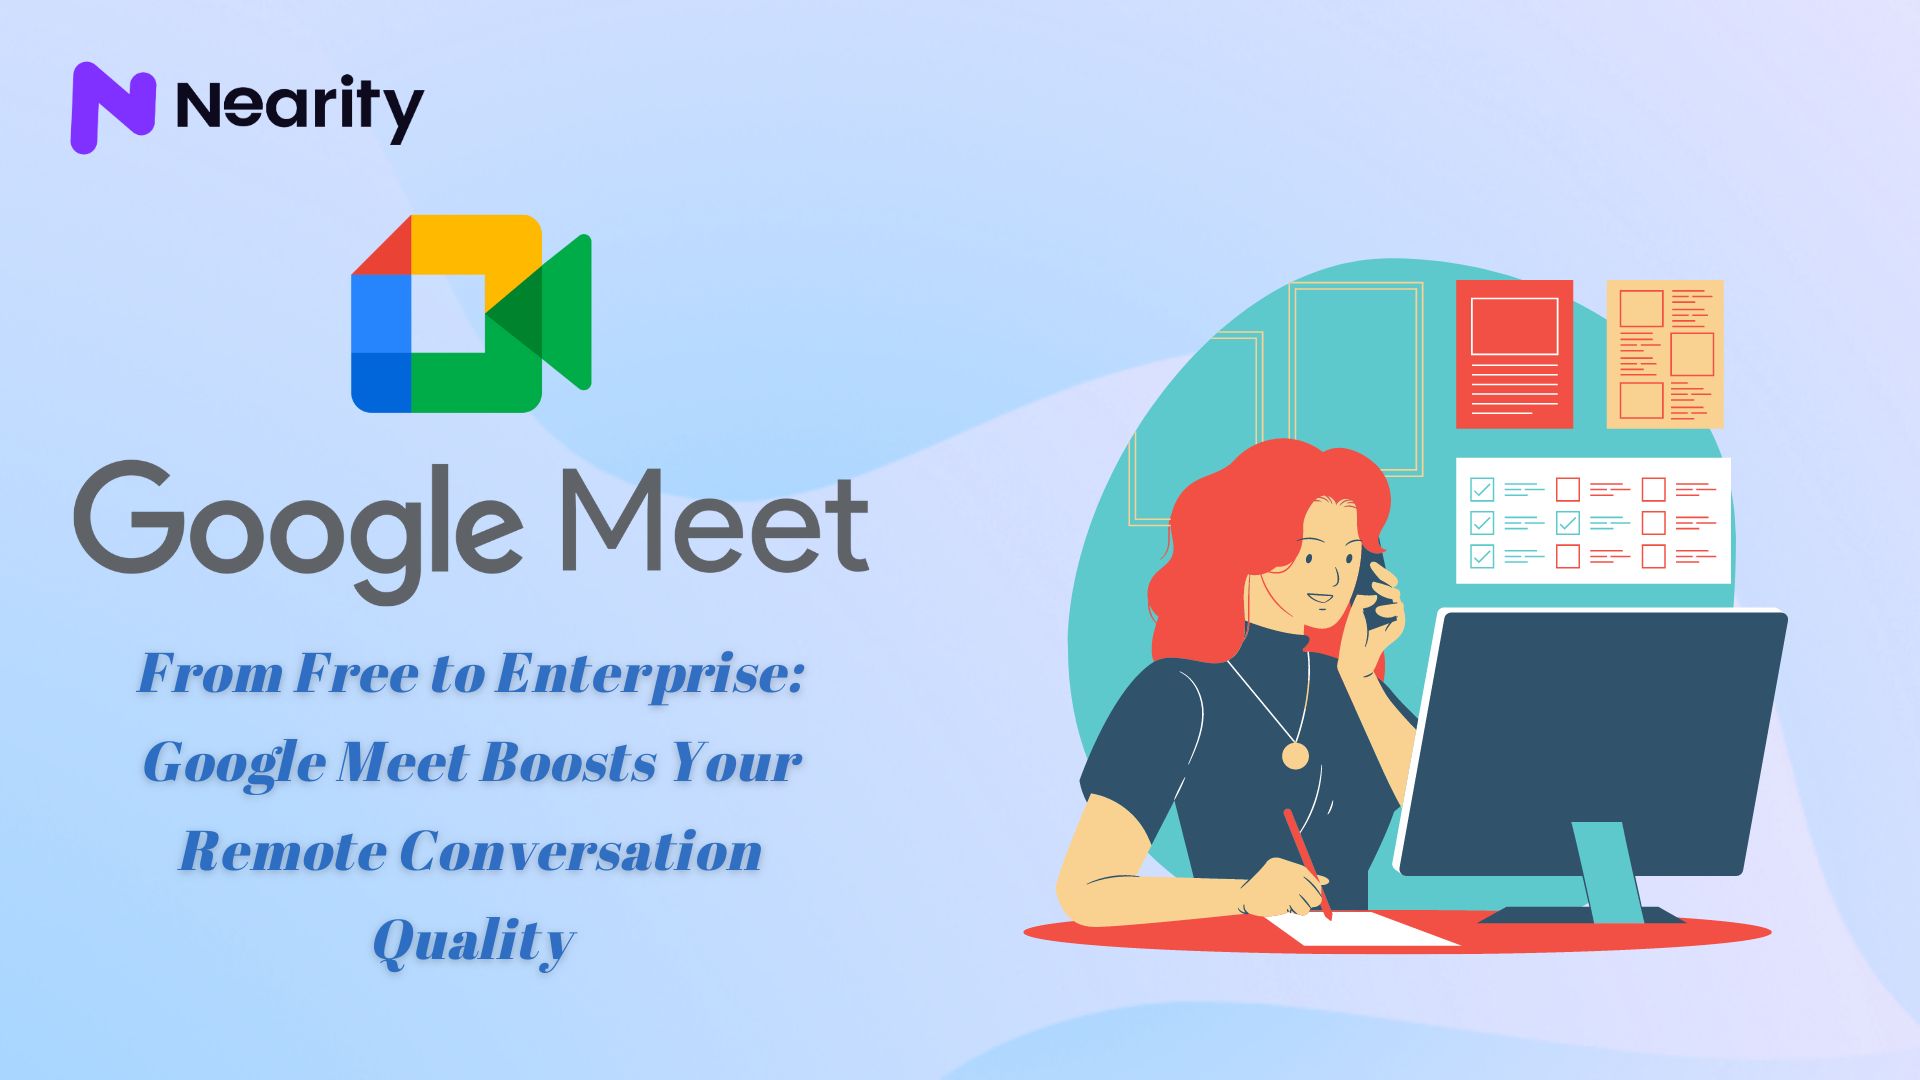 From Free to Enterprise: Google Meet Boosts Your Remote Conversation Quality